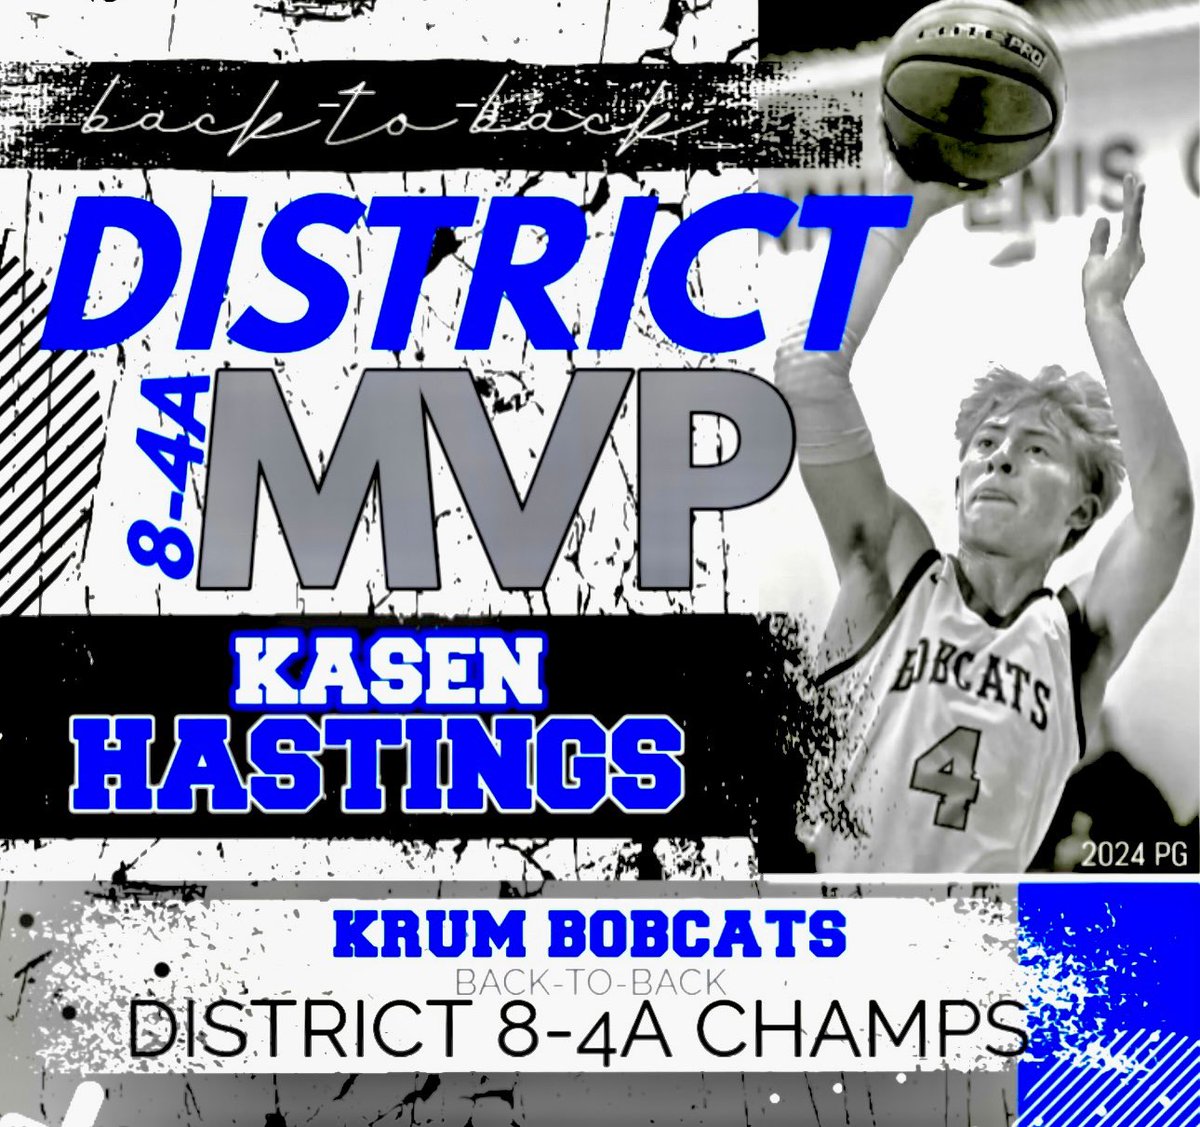 Back-to-Back District 8-4A MVP 🔹17 points 🔹5 assists 🔹5 rebounds 🔹3 steals ▫️65% 2-point % ▫️58% 3-point % ▫️87% FT % Back-to-Back Undefeated District 8-4A Champs 🏆 #srszn #earnit @KrumBoysBB @sports_drc @Tabchoops @uiltexas @TexasHoopsGASO @hoopinsider